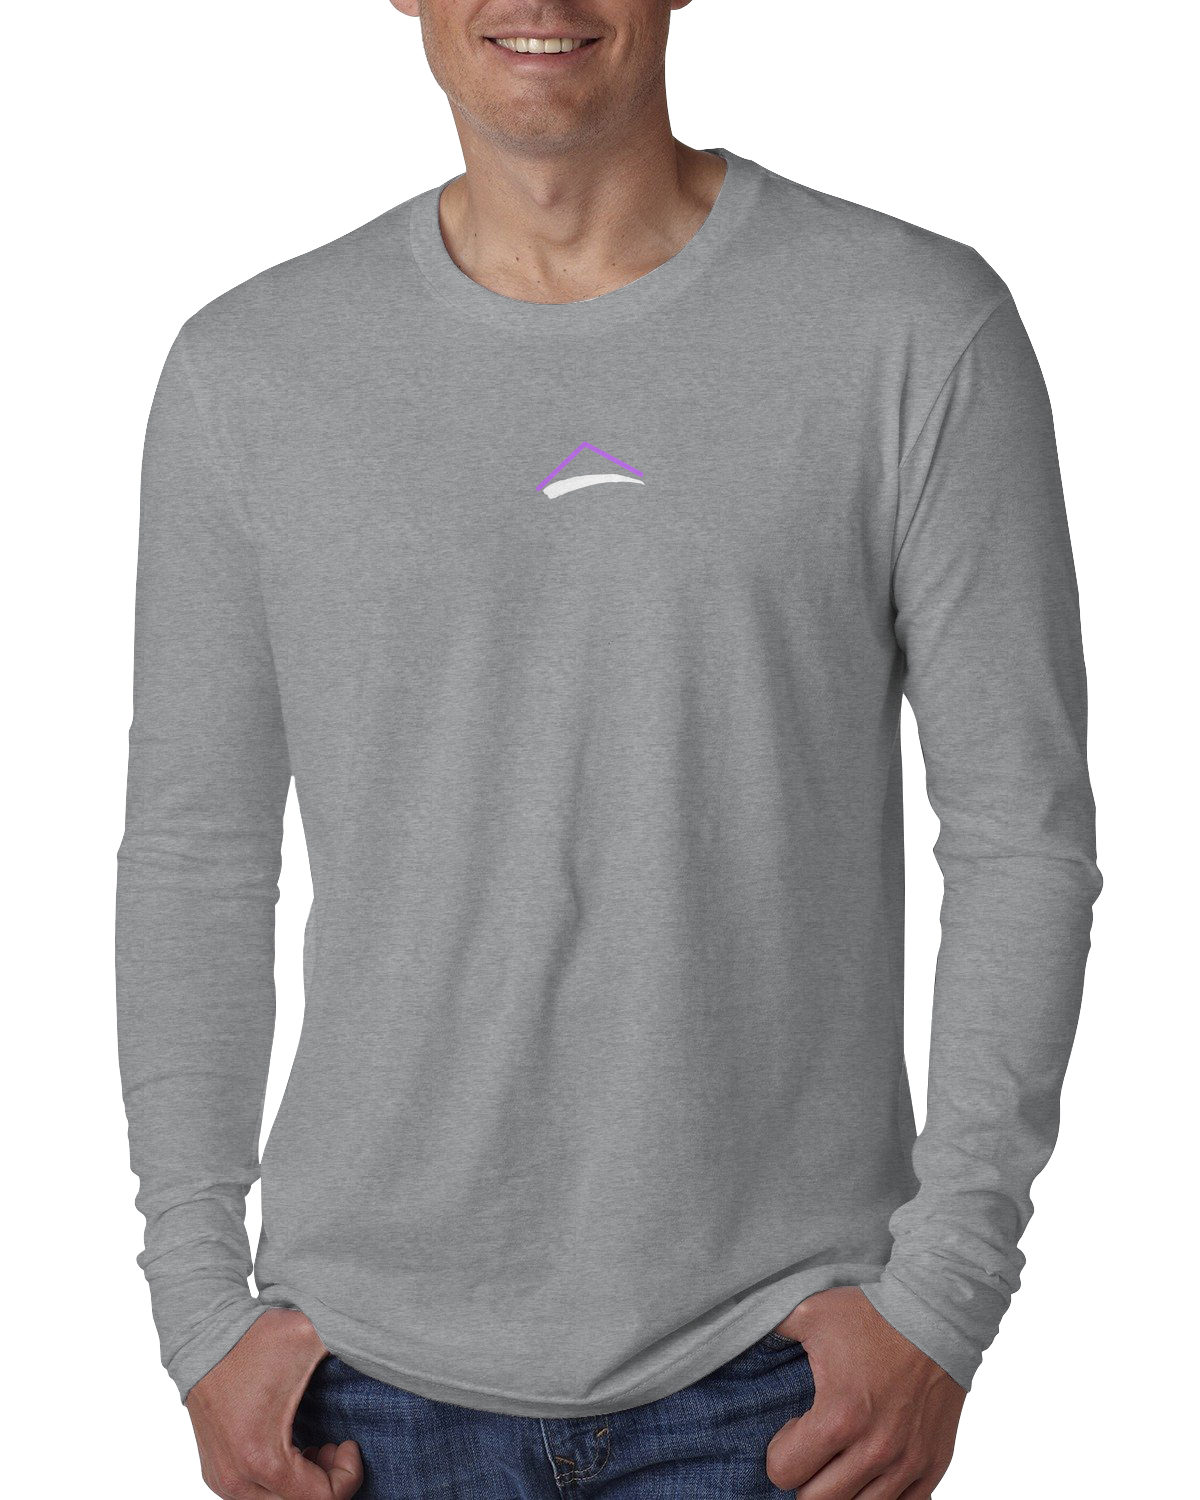 The Chocolate House (Unisex Luxury Fitted Long Sleeve Tee)